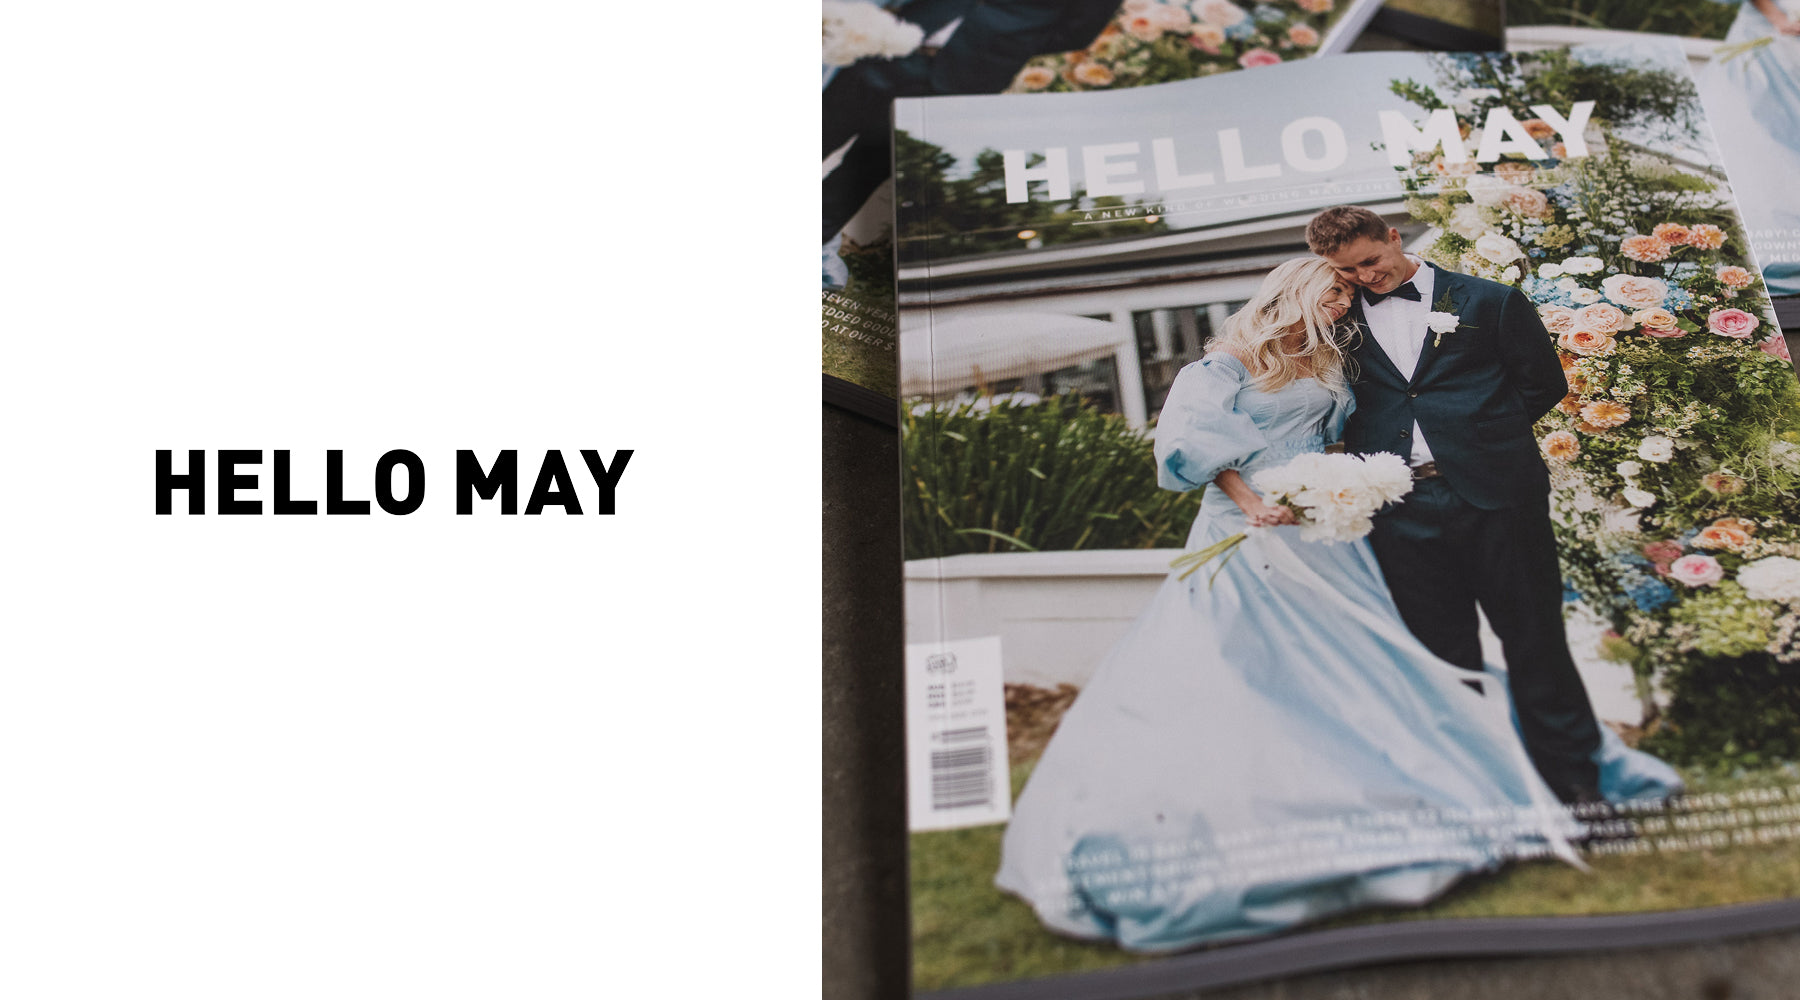 Hello May (March 2022)